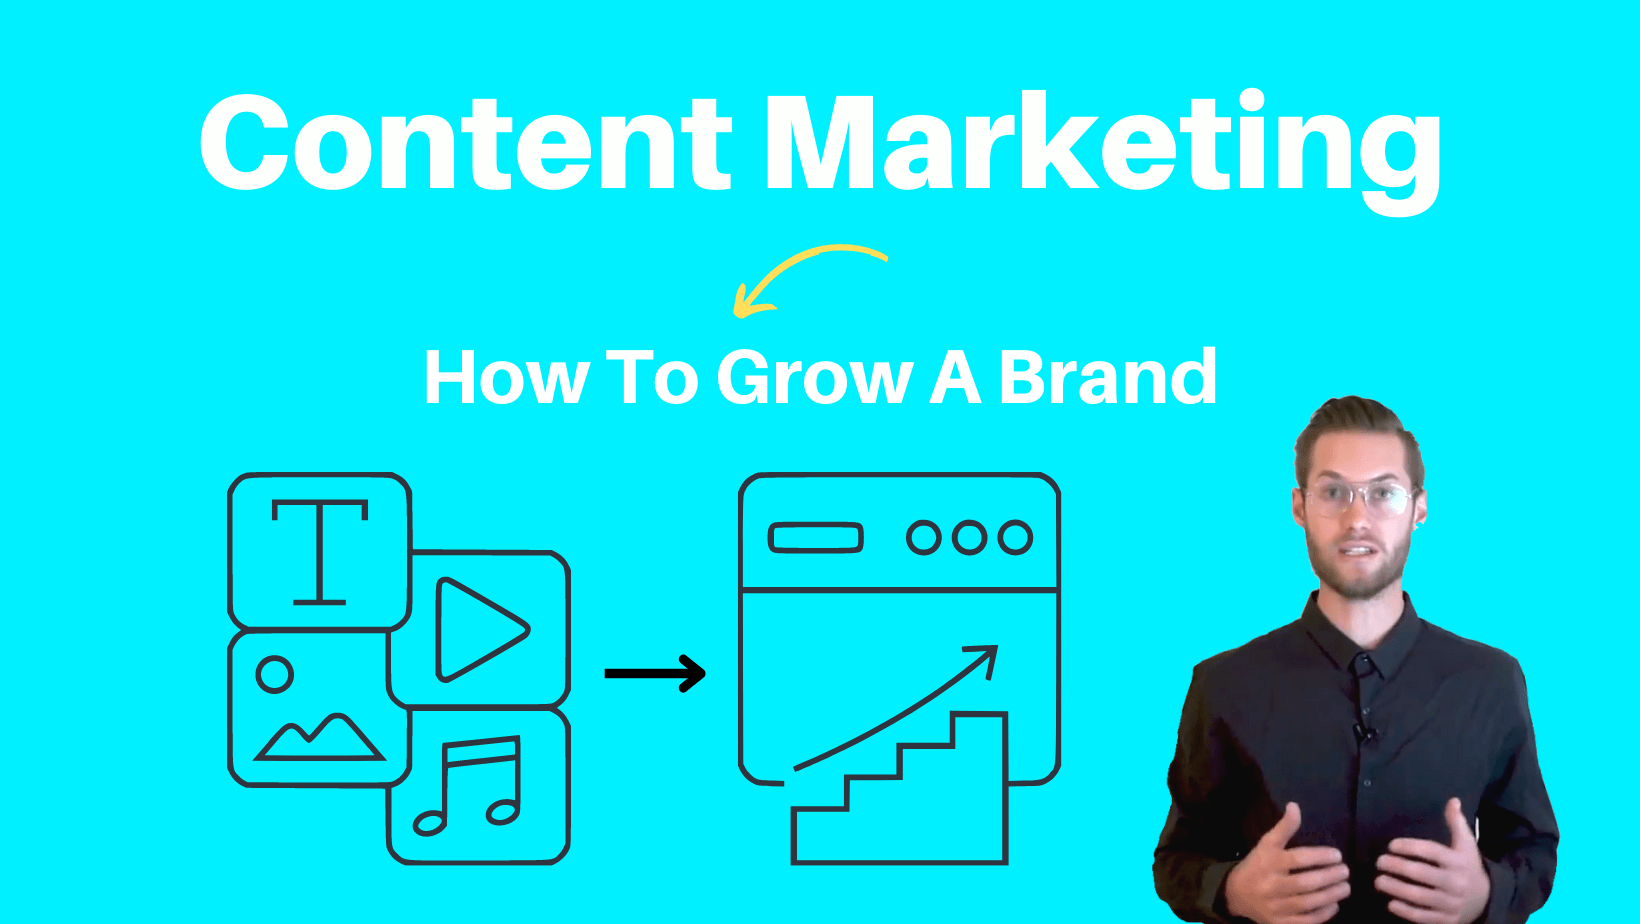 Content Marketing How To Grow A Brand